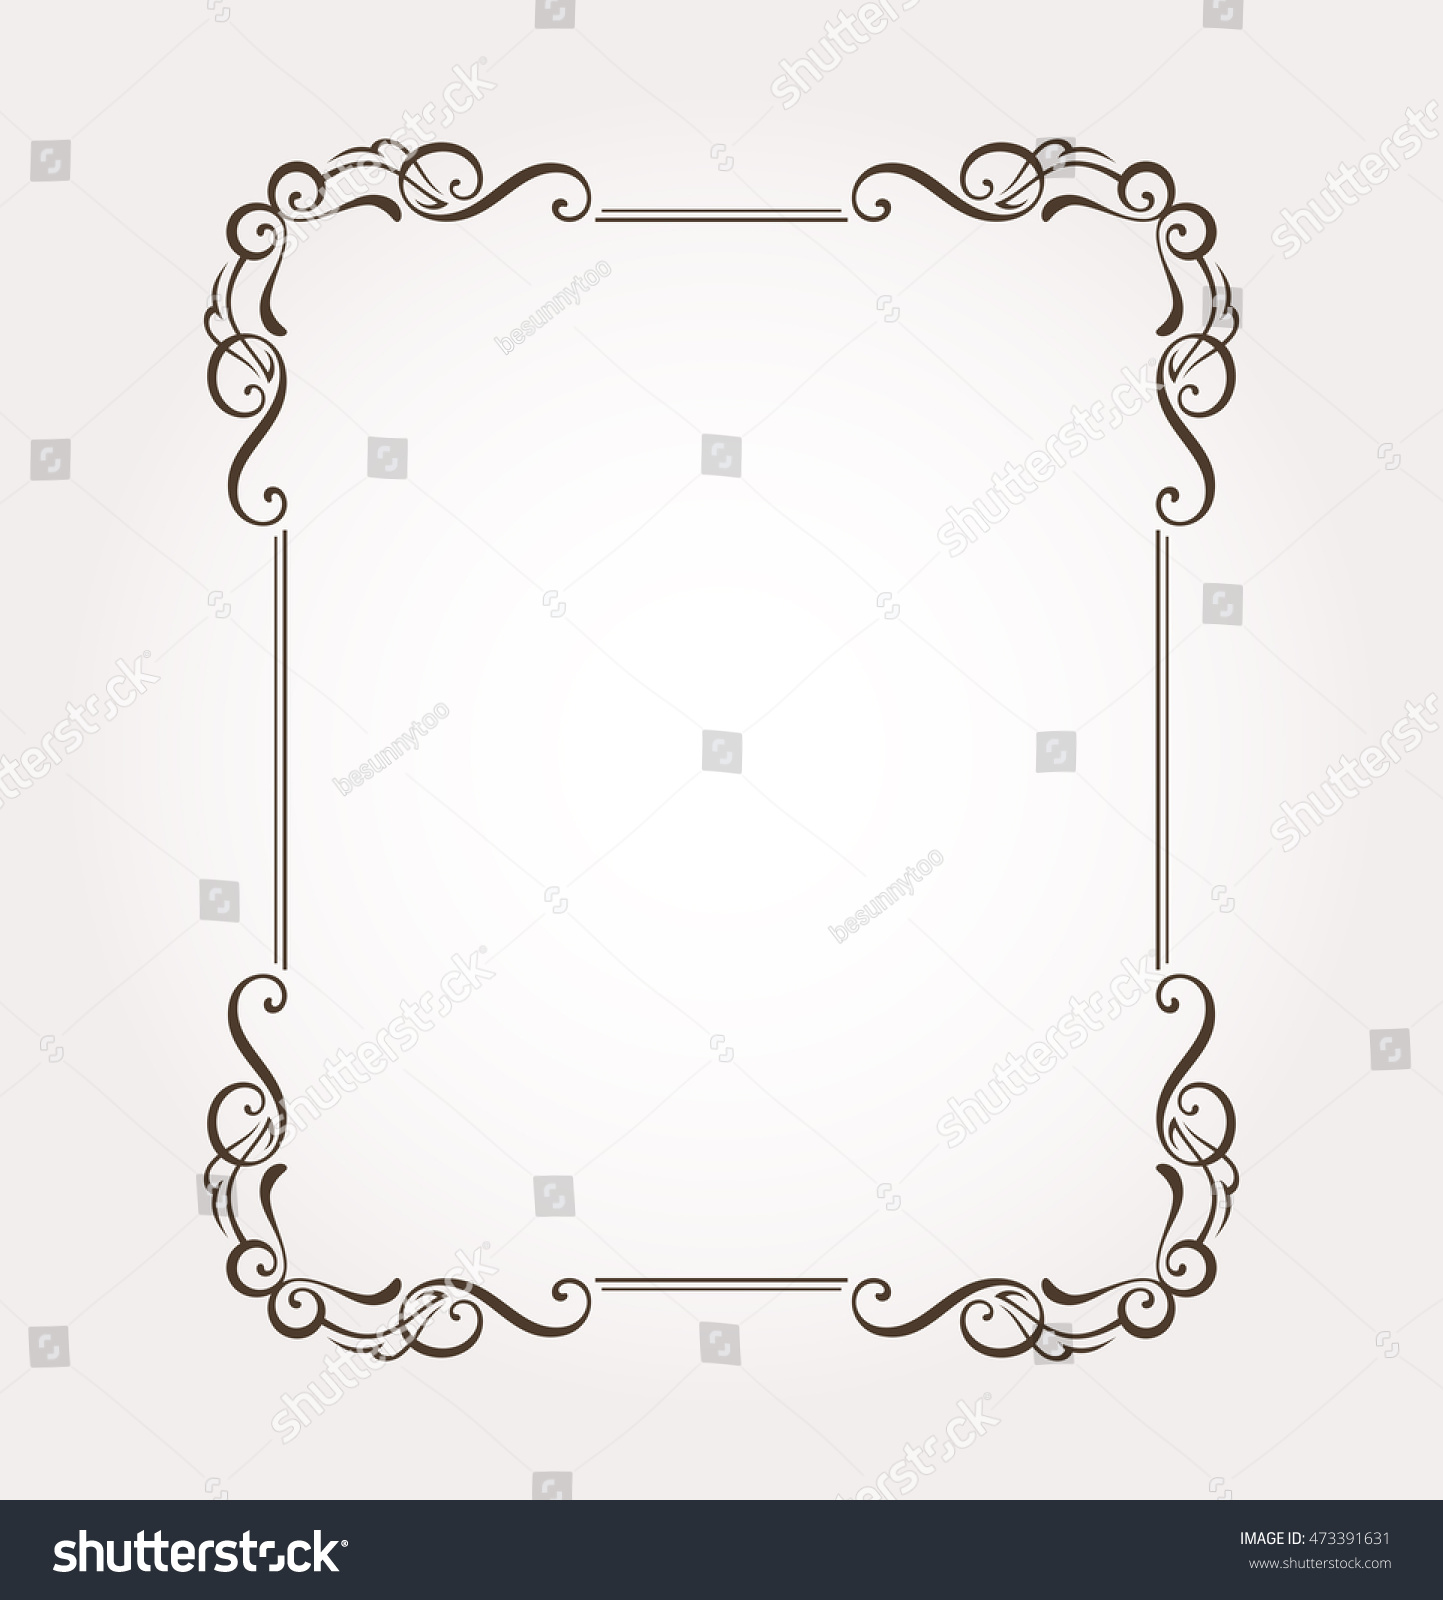 Frame Border Fancy Page Decoration Vector Stock Vector 473391631 ...